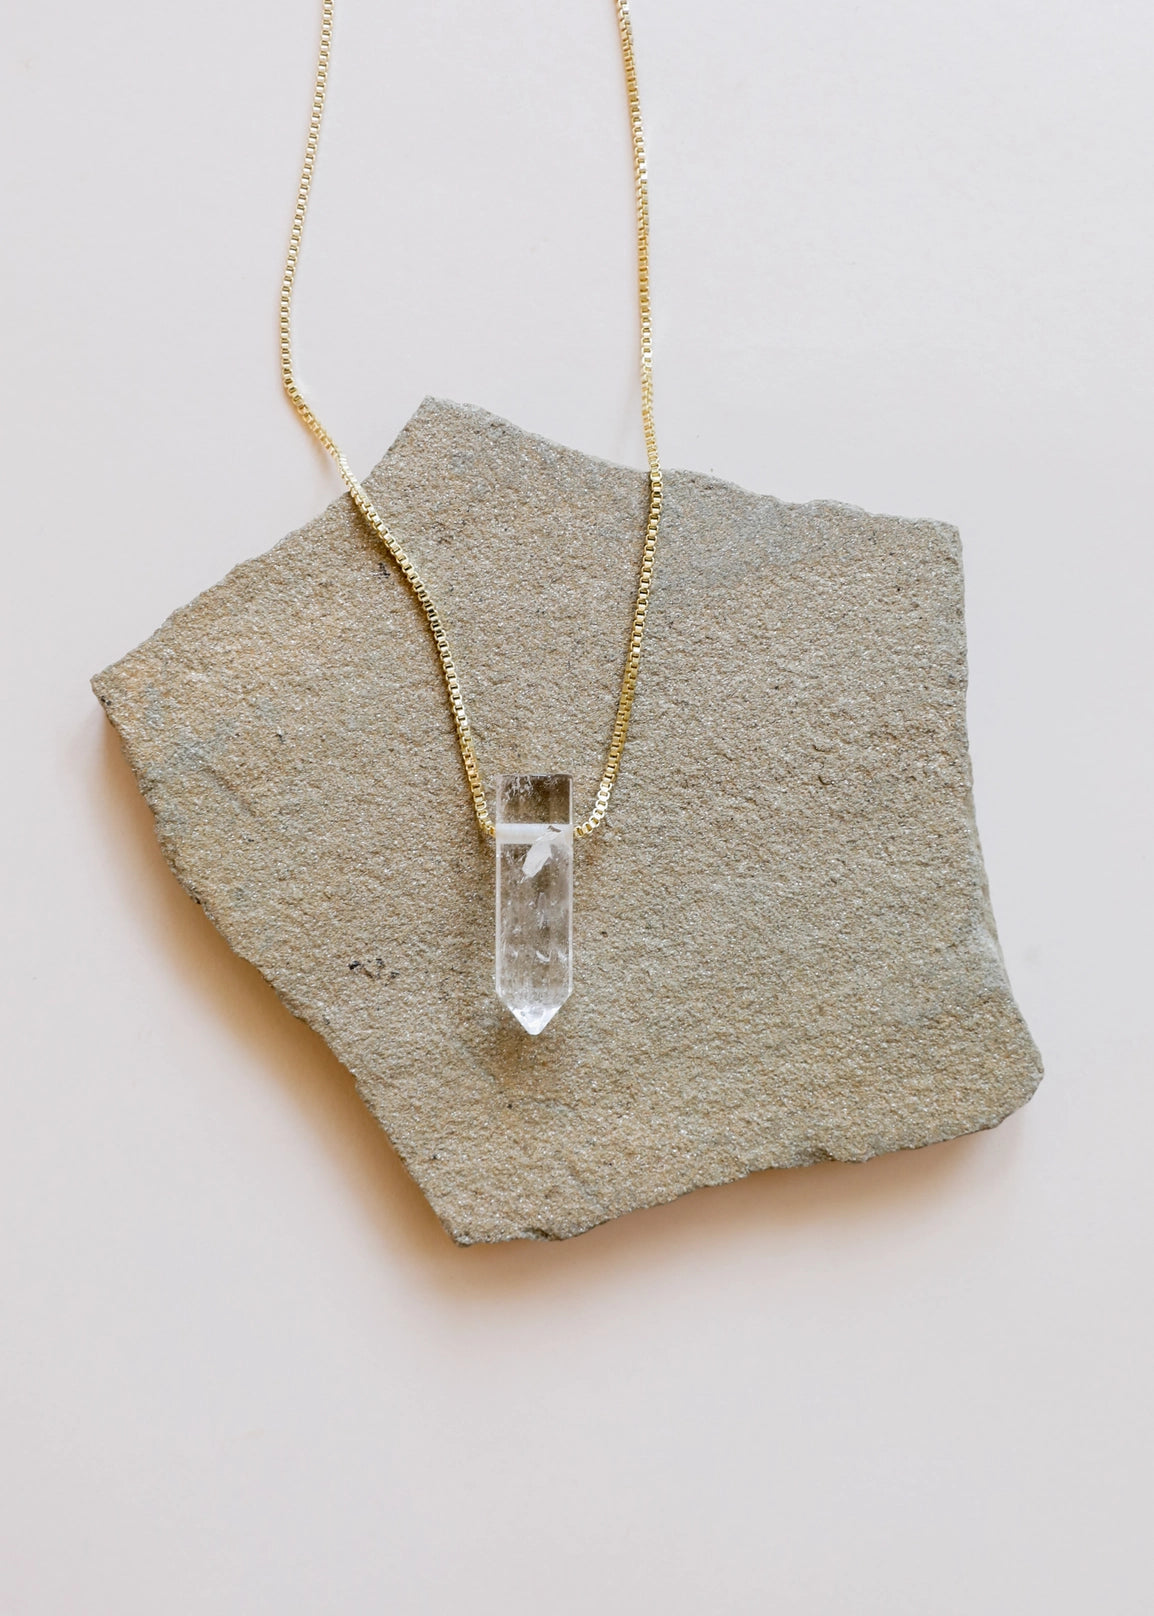 Clear Quartz Pendant- Snake Chain Necklace 18kt gold plated brass - Moon Room Shop and Wellness